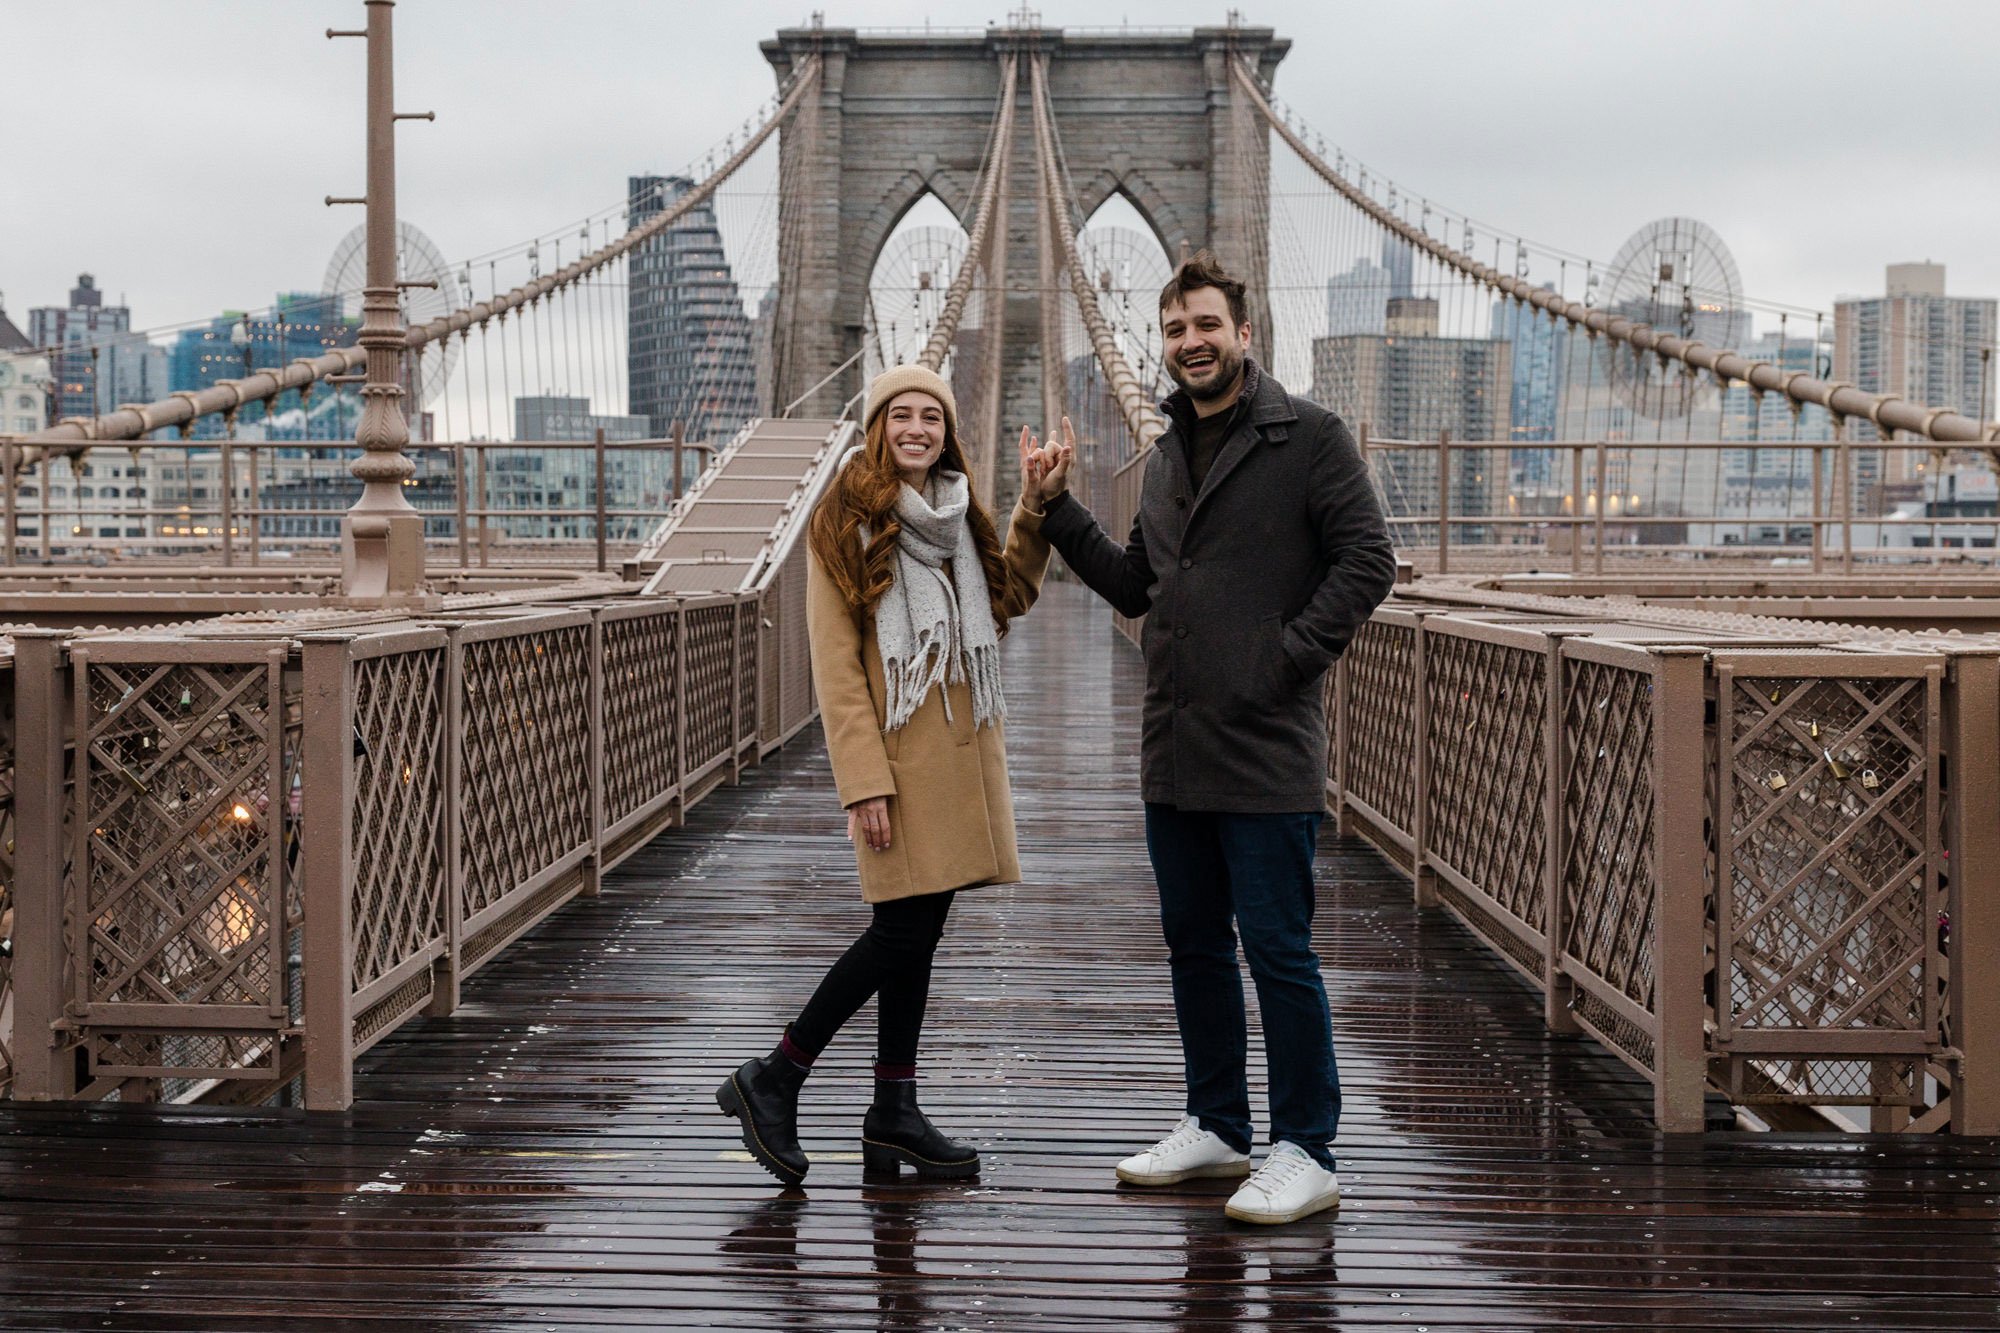 An engaged couple standing on the Brooklyn Bridge saying I love you in sign language